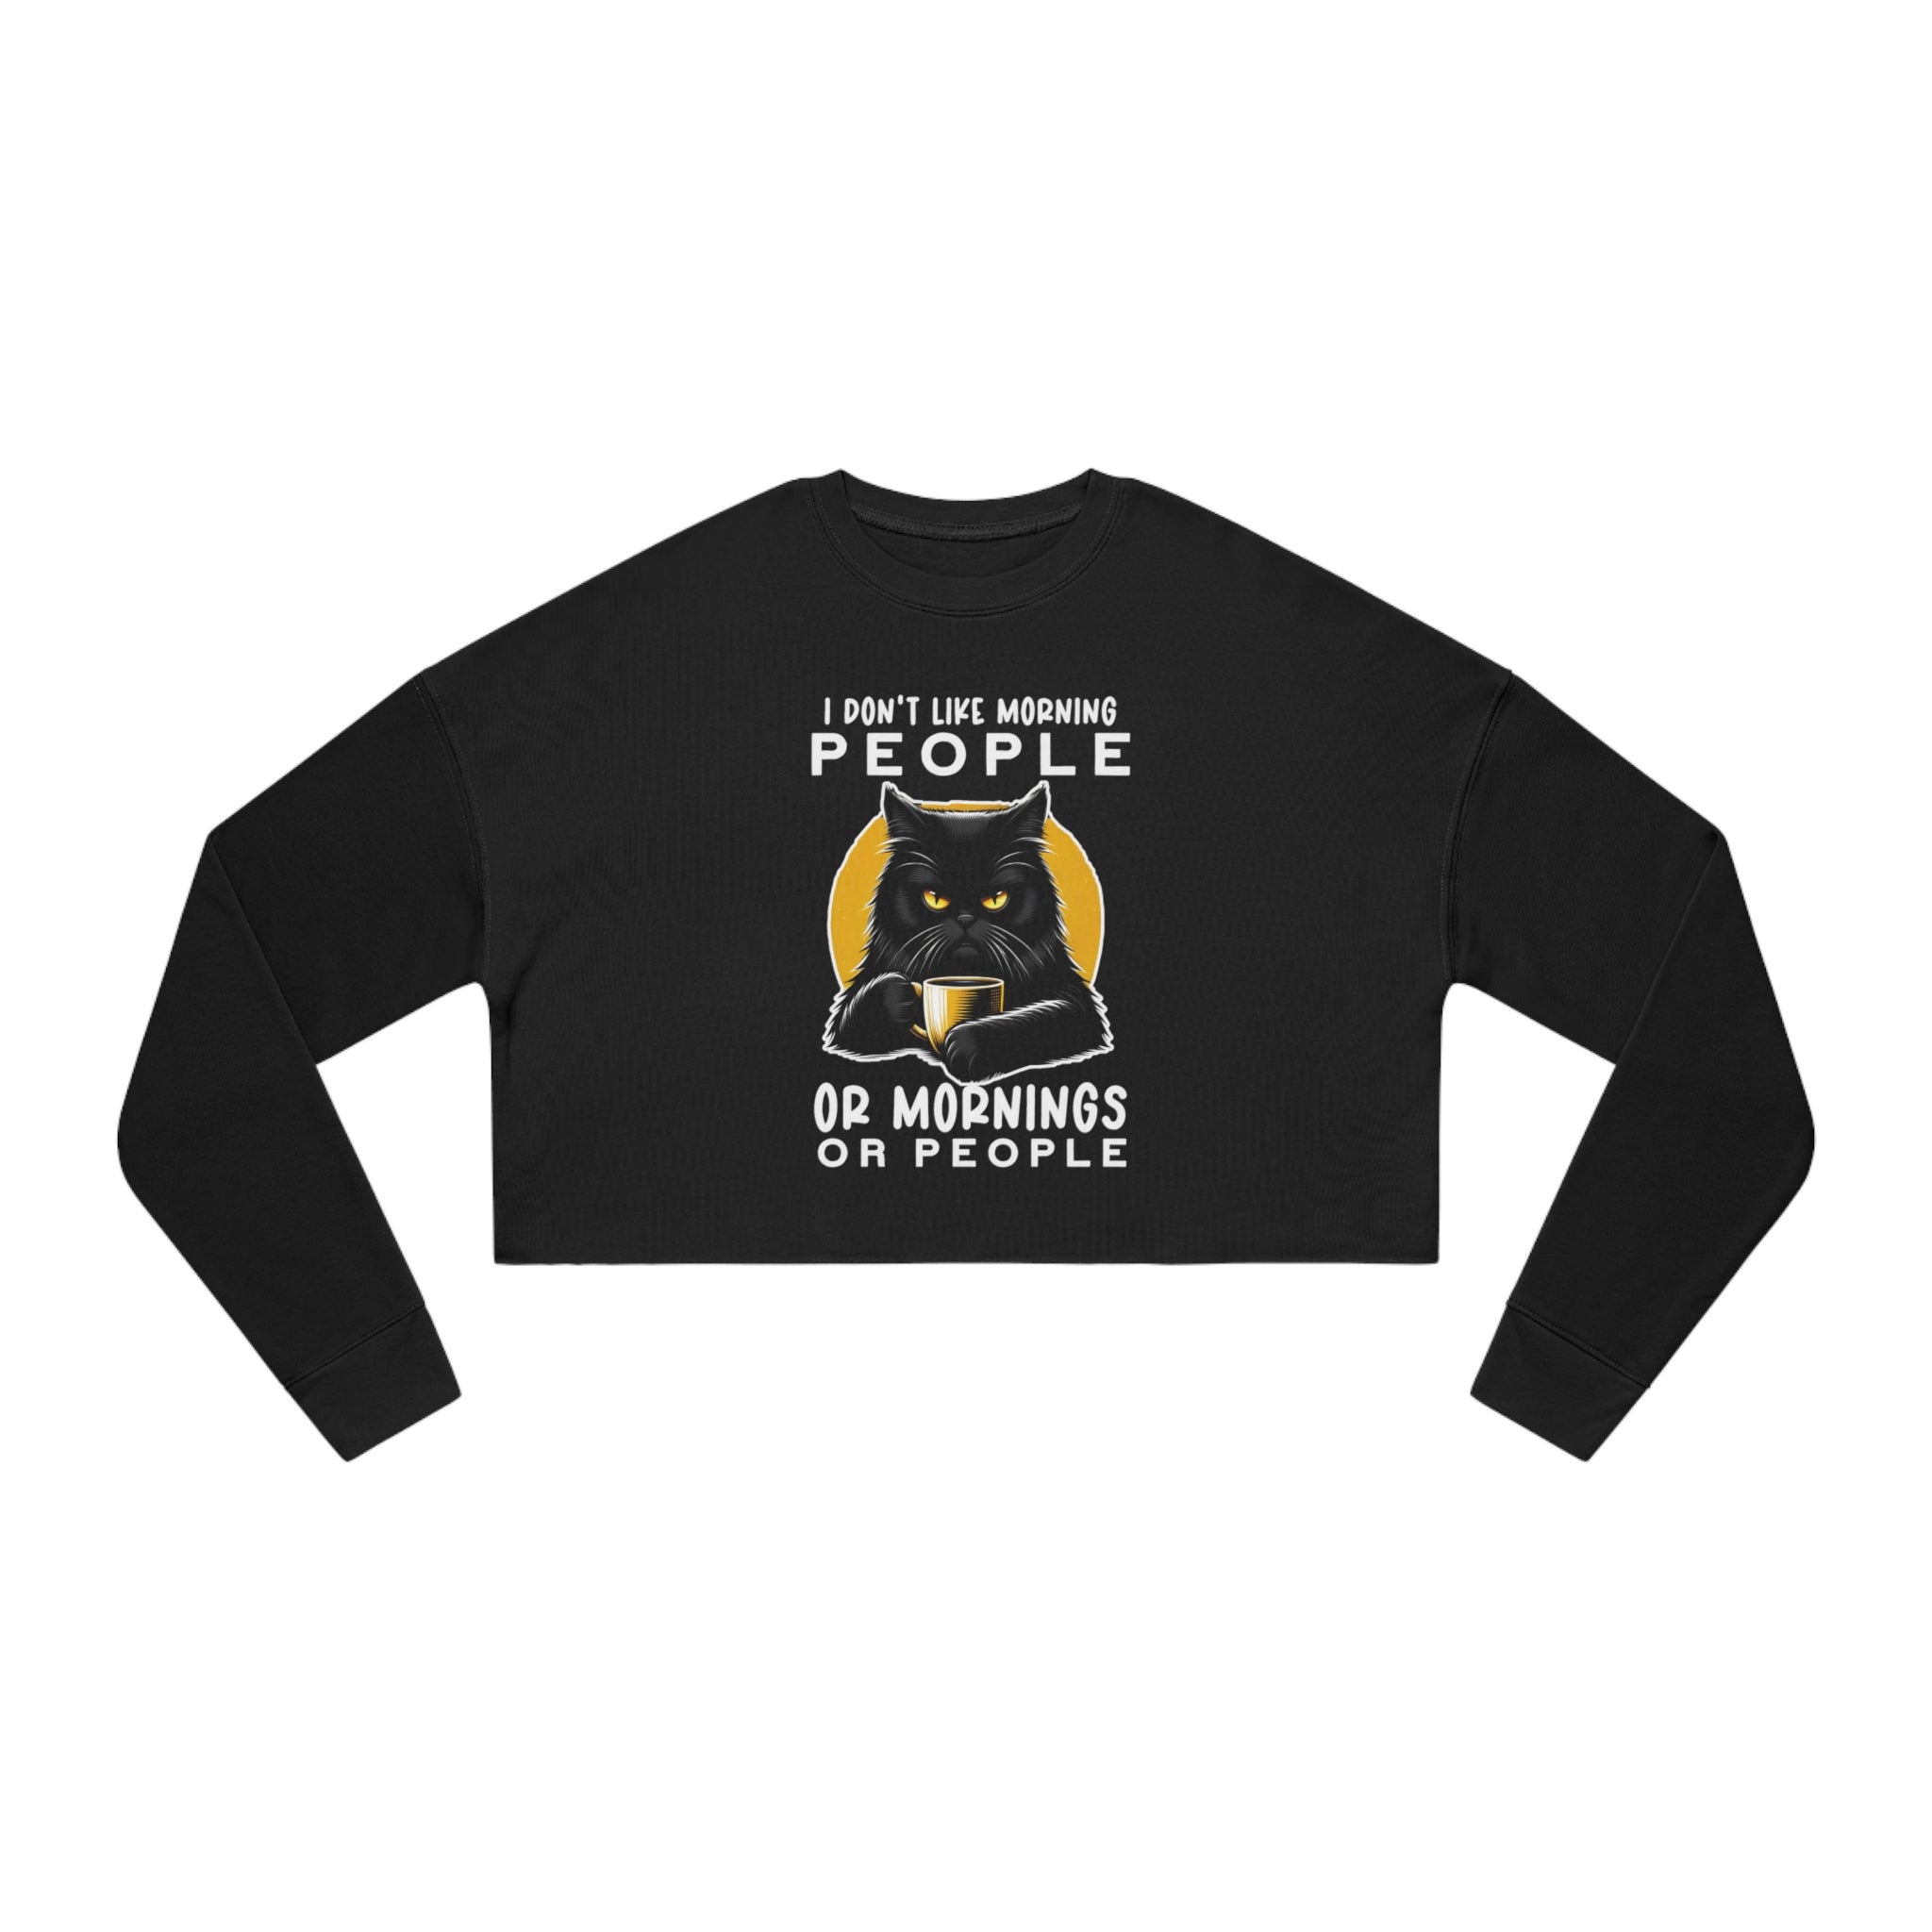 This image showcases a trendy women's cropped sweatshirt featuring the famous Grumpy Cat meme with the slogan “I Don't Like People...Grumpy Cat Coffee." The design emphasizes a playful yet relatable sentiment for those whose mornings must start with coffee. The sweatshirt's cropped style adds a fashionable edge, making it an ideal choice for those looking to combine comfort with a statement piece.